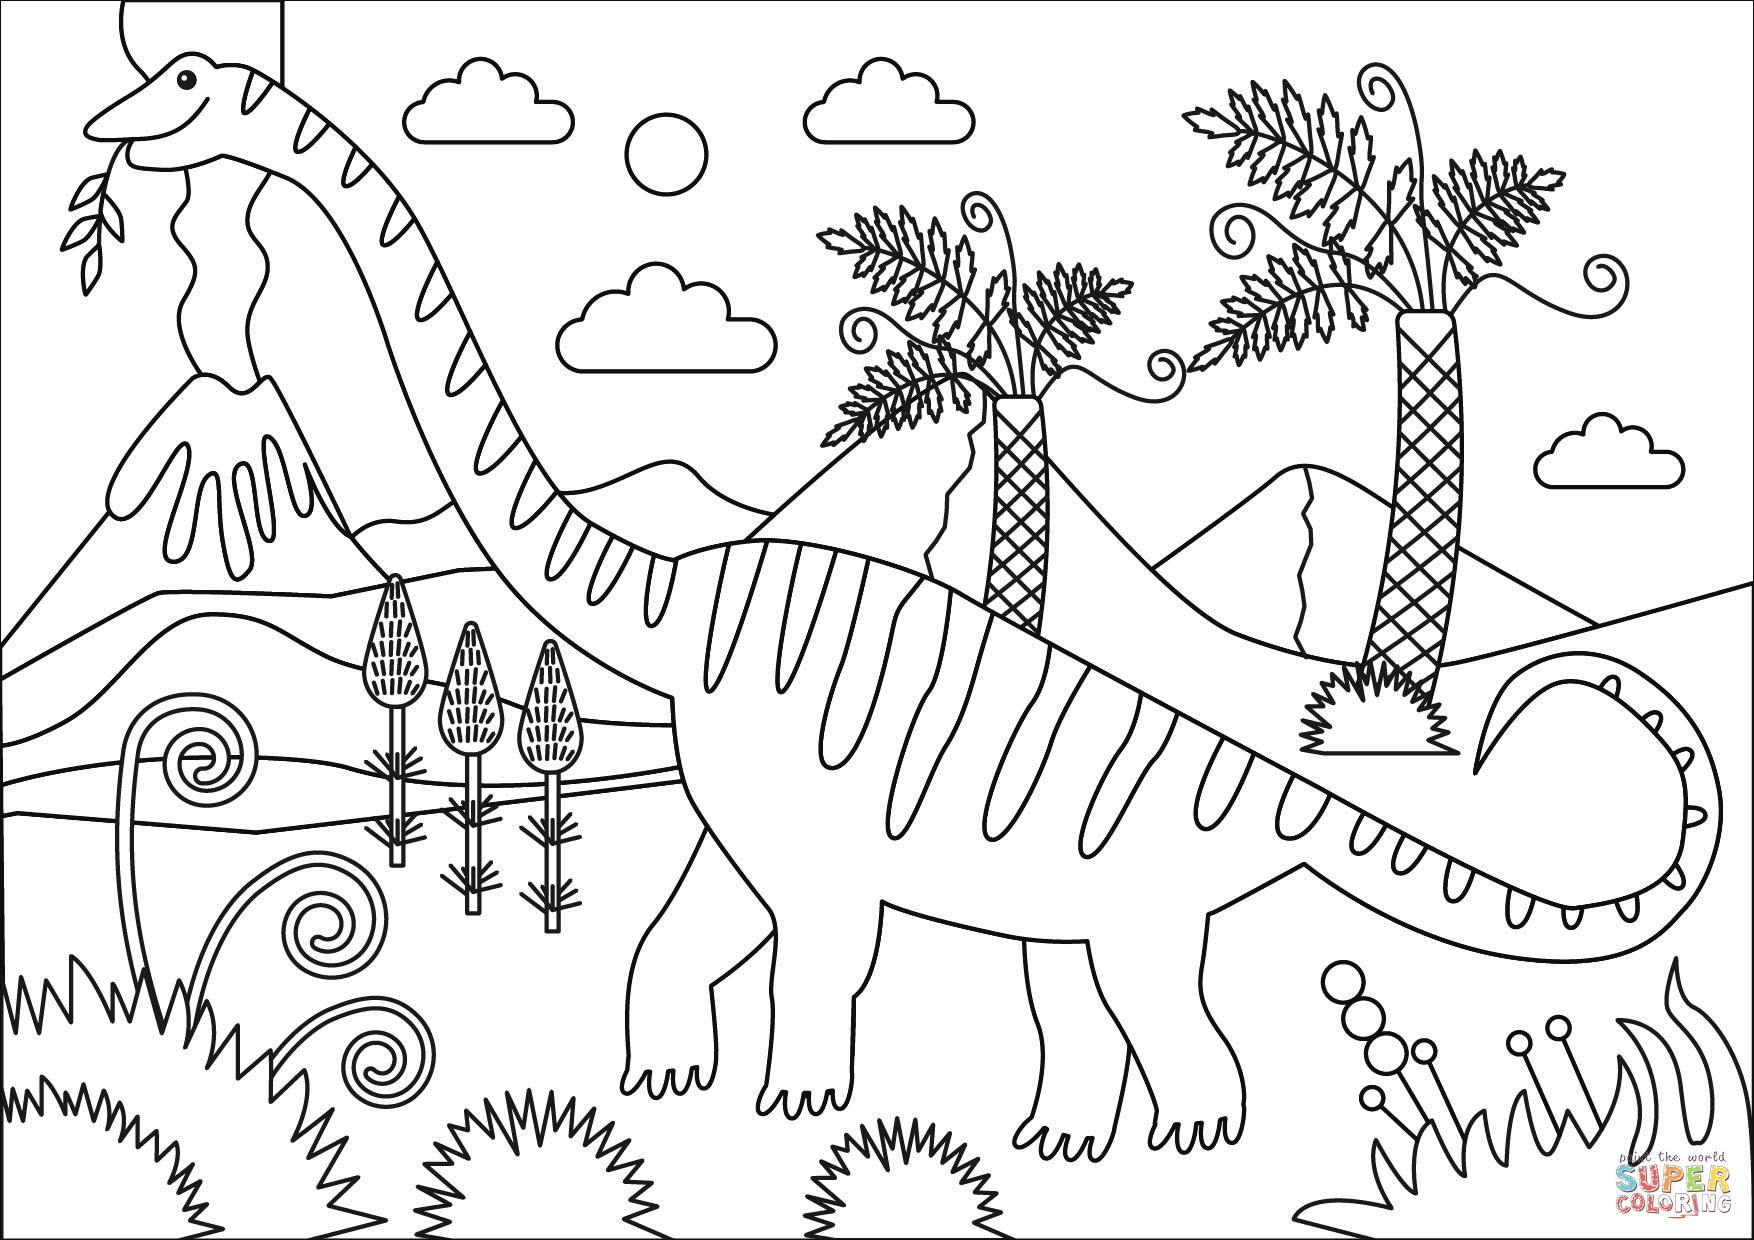 Mamenchisaurus coloring page free printable coloring pages